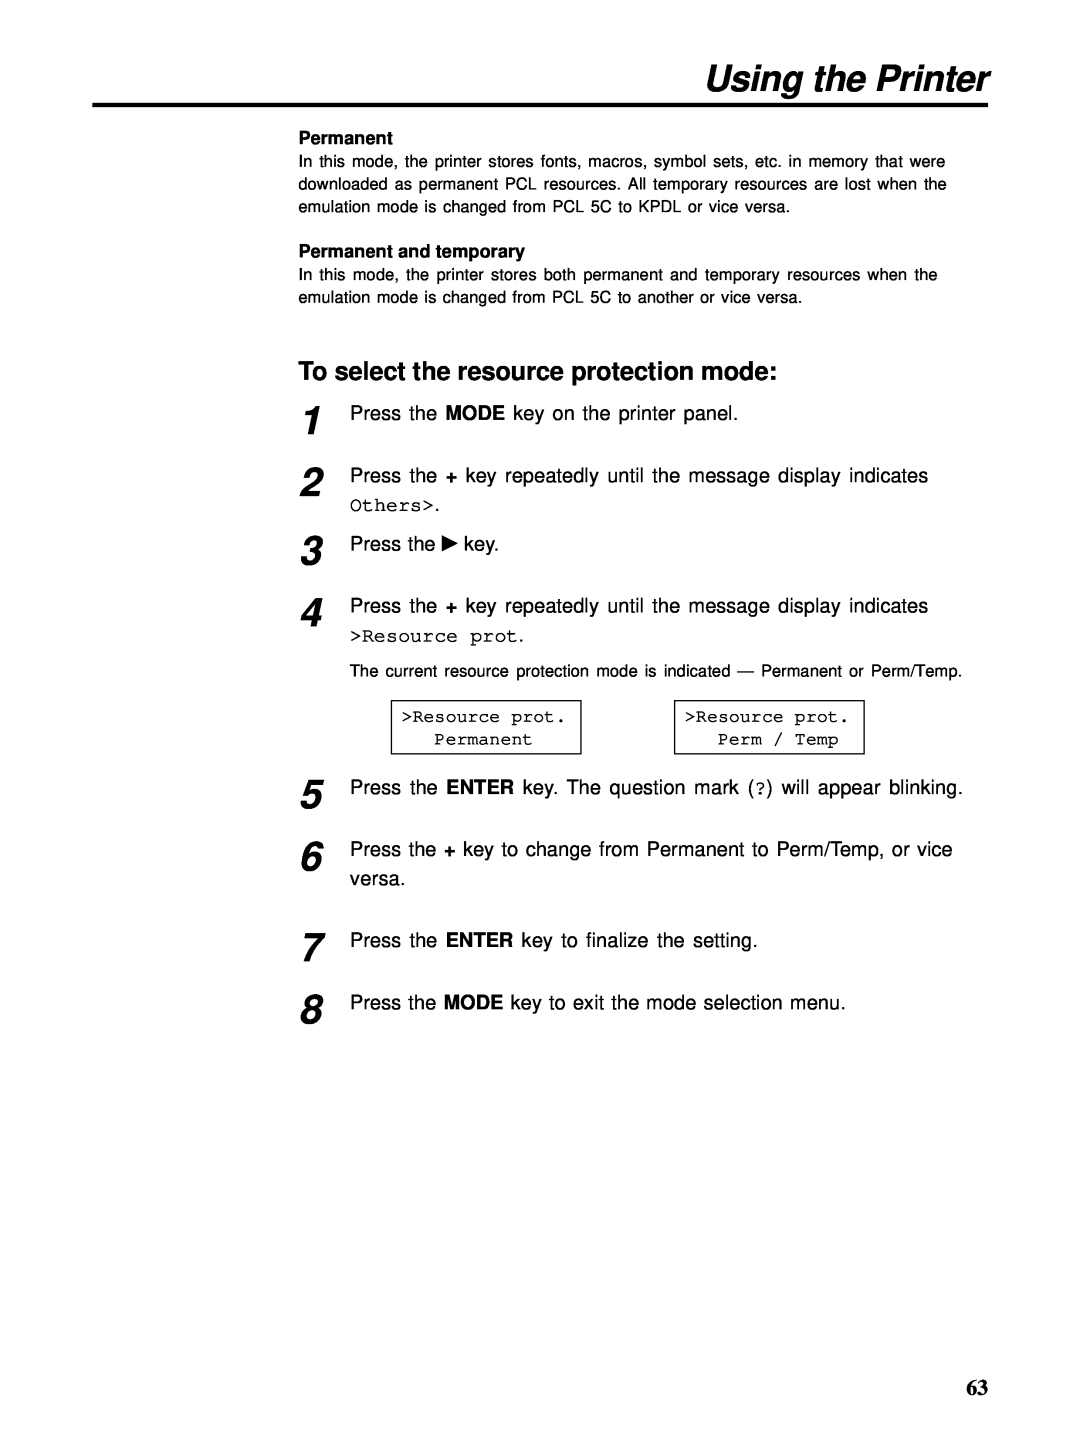 HP Ci 1100 manual To select the resource protection mode, Using the Printer, Permanent and temporary 